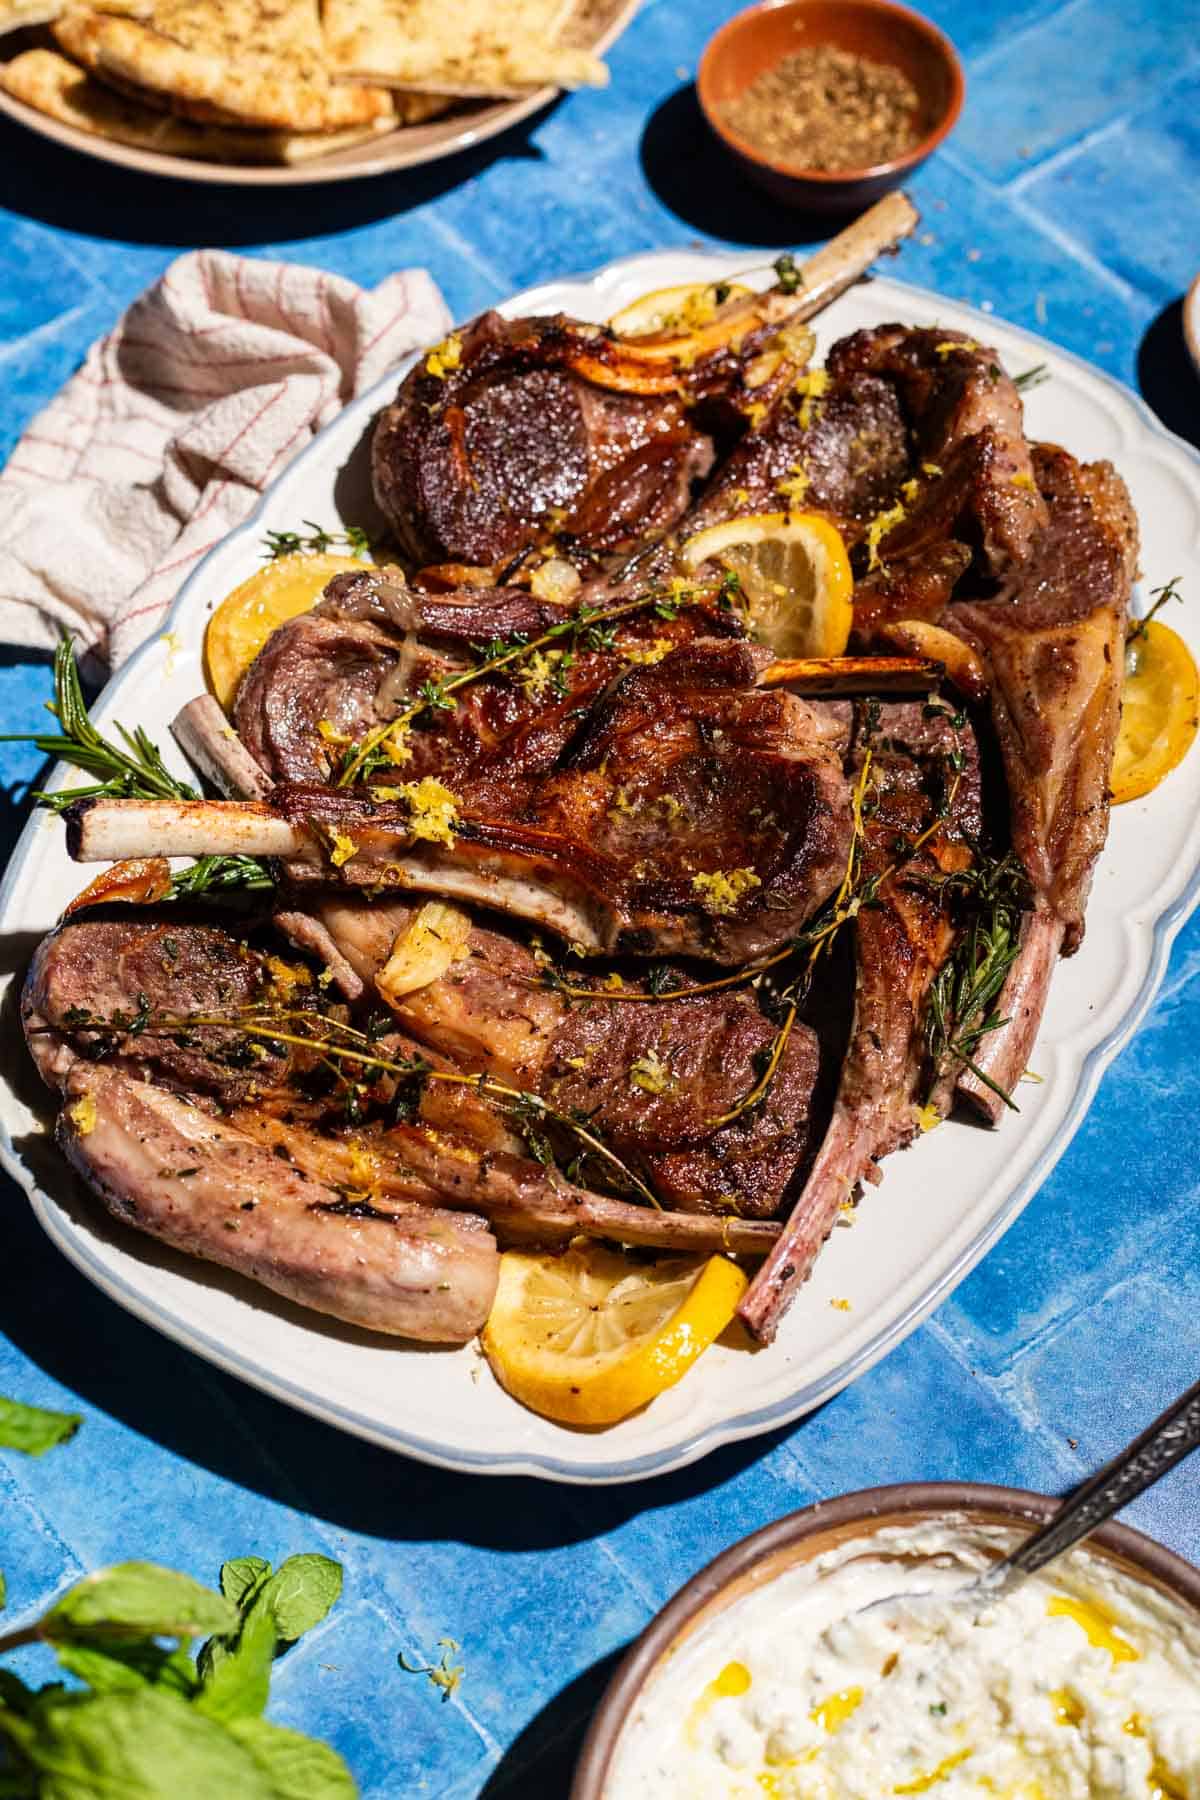 Pan seared lamb chops on a serving platter. This is surrounded by a plate of herbed flatbread, a bowl of yogurt sauce, a small bowl of za'atar, a kitchen towel and some mint.